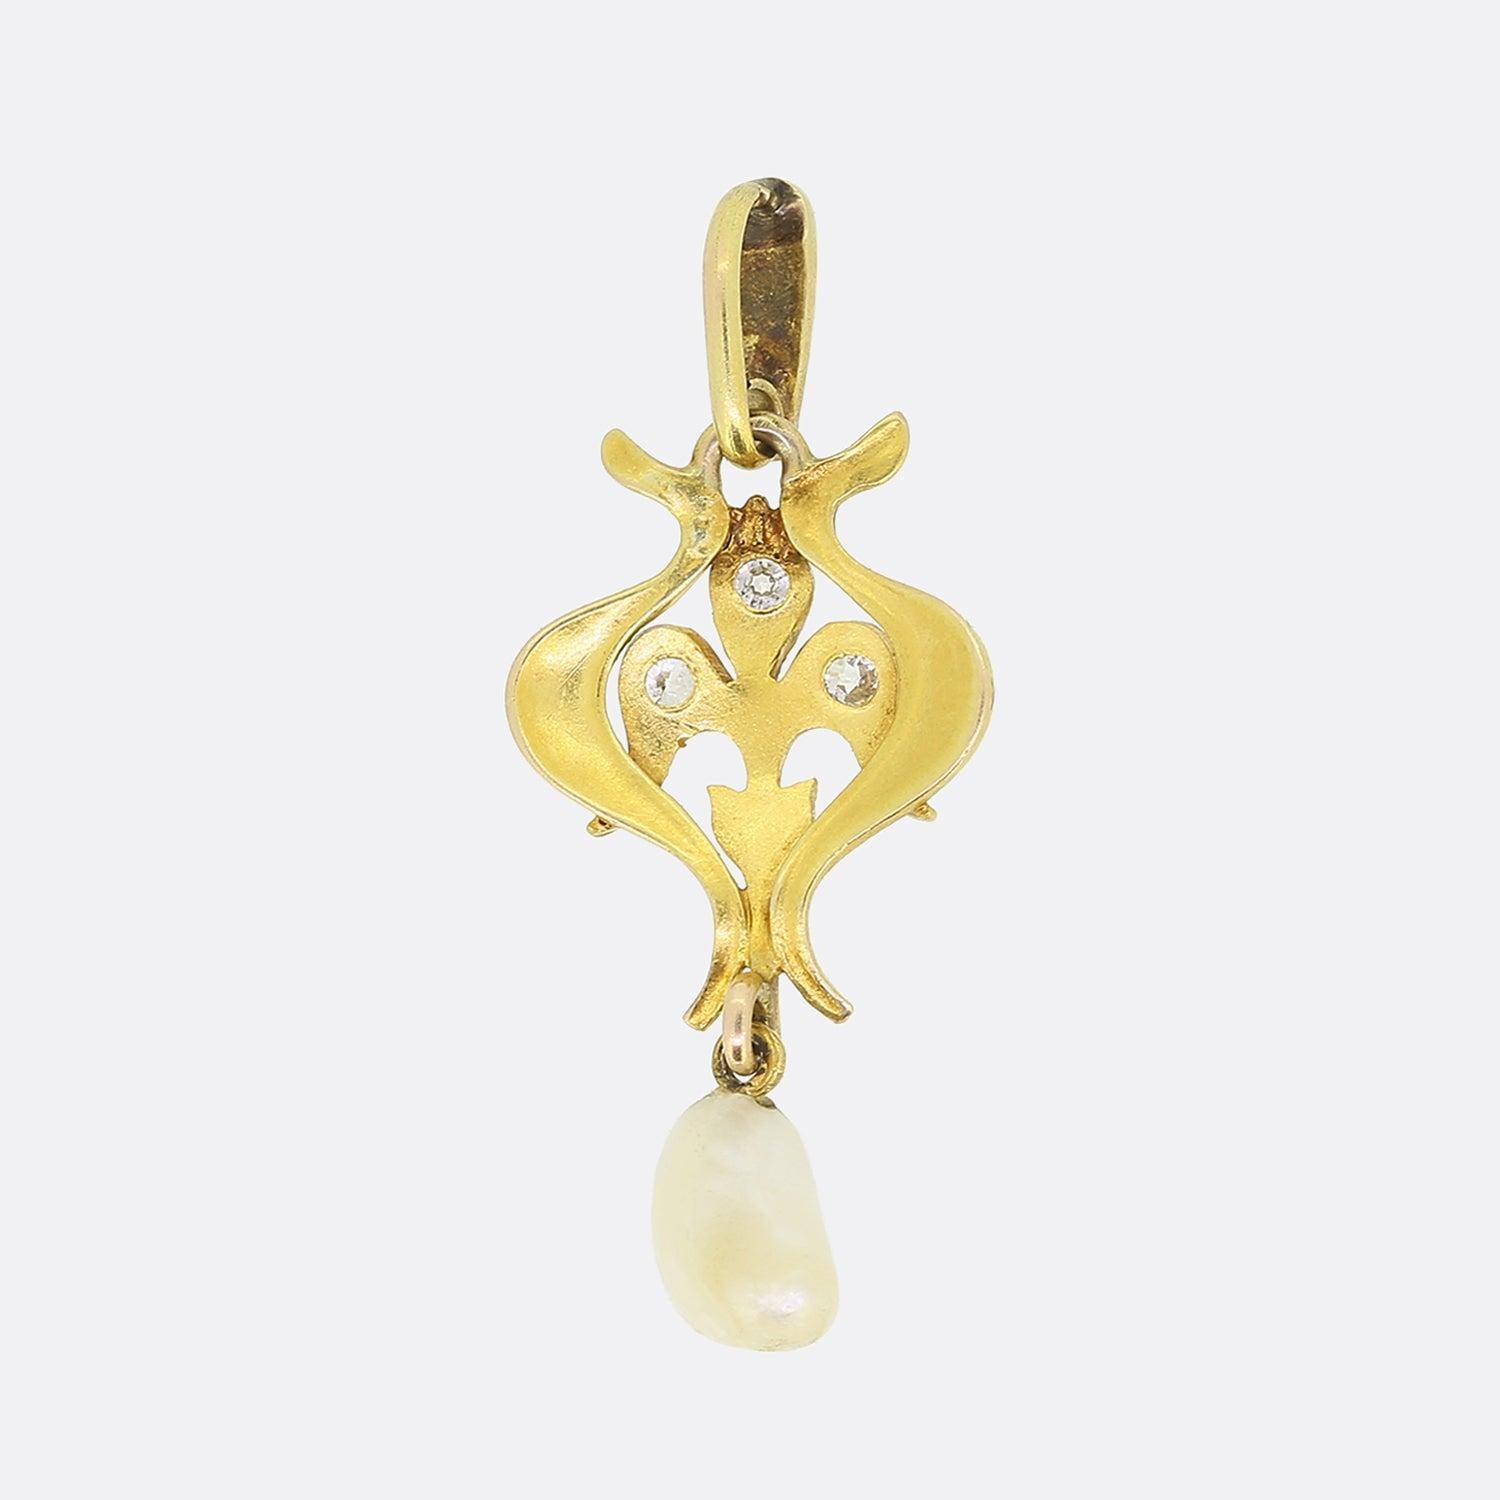 This is an Art Nouveau 15ct yellow gold natural pearl and diamond pendant. The highly decorated, iconic Art Nouveau frame has a floriated design, composed of sinuous leaves and a diamond set 'fleur de lis' in the centre. At the bottom of the pendant